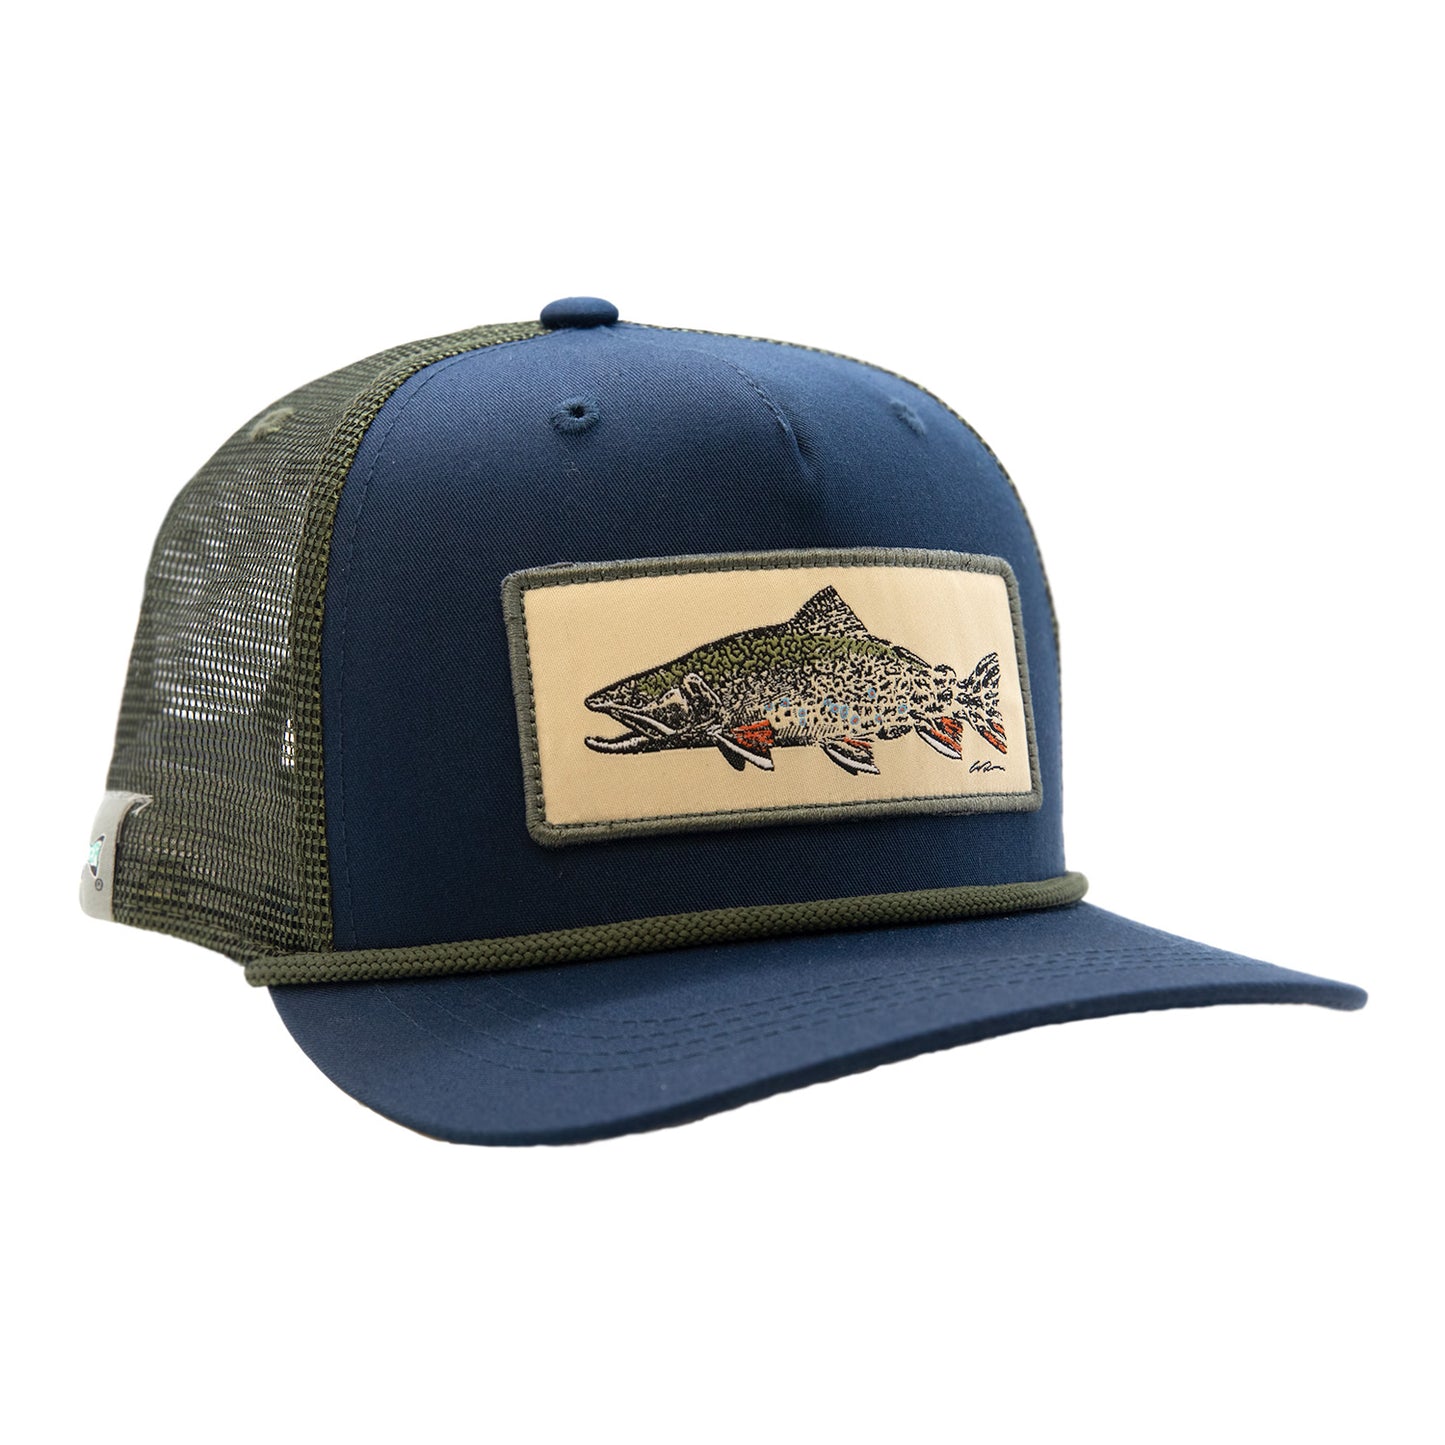 Navy hat with green mesh back with a patch that has a brook trout that fades into flies towards the tail